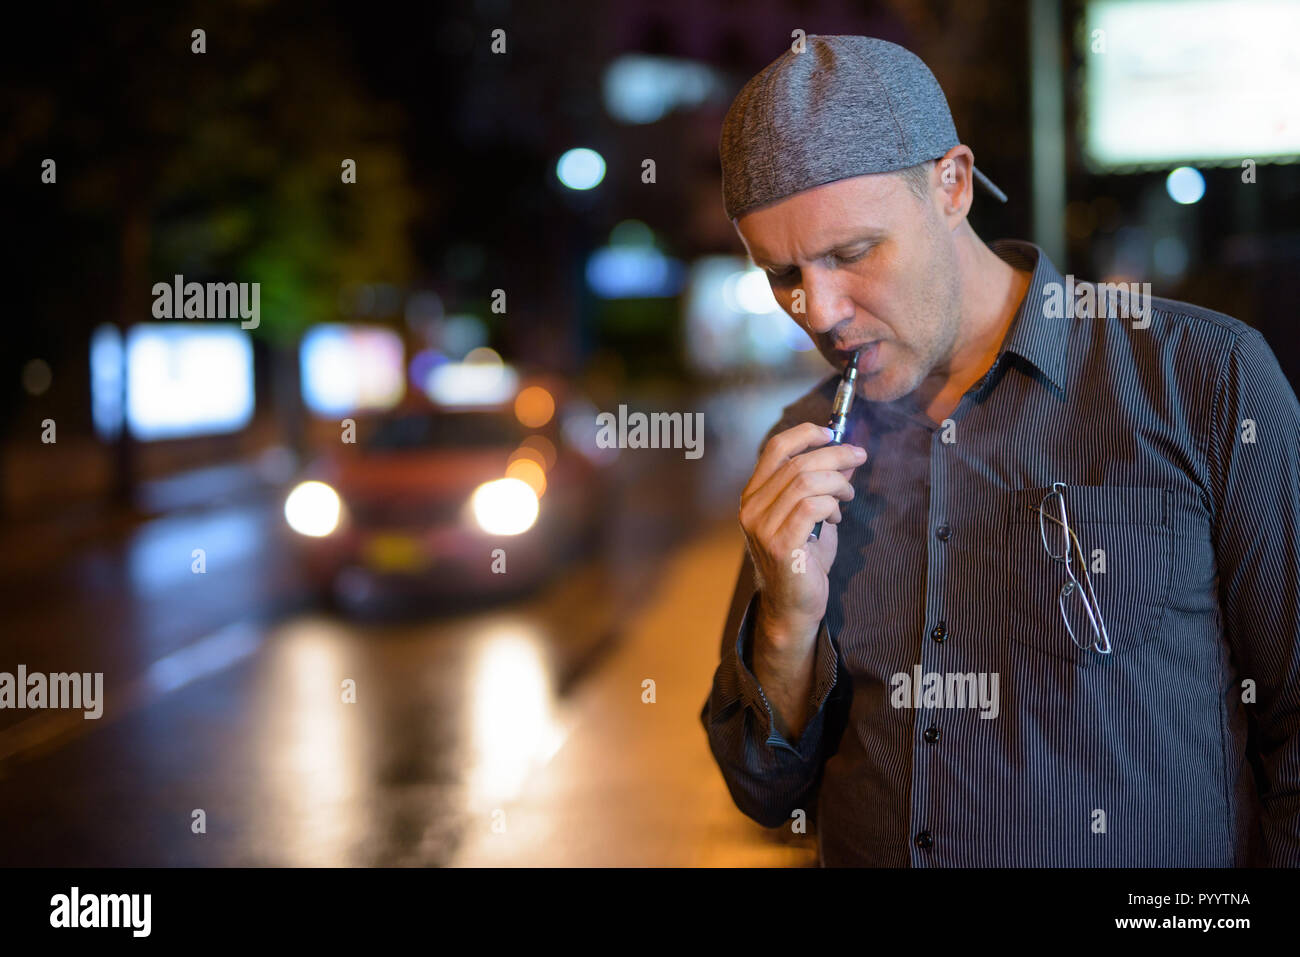 Mature man smoking electronic cigarette in the streets at night Stock Photo